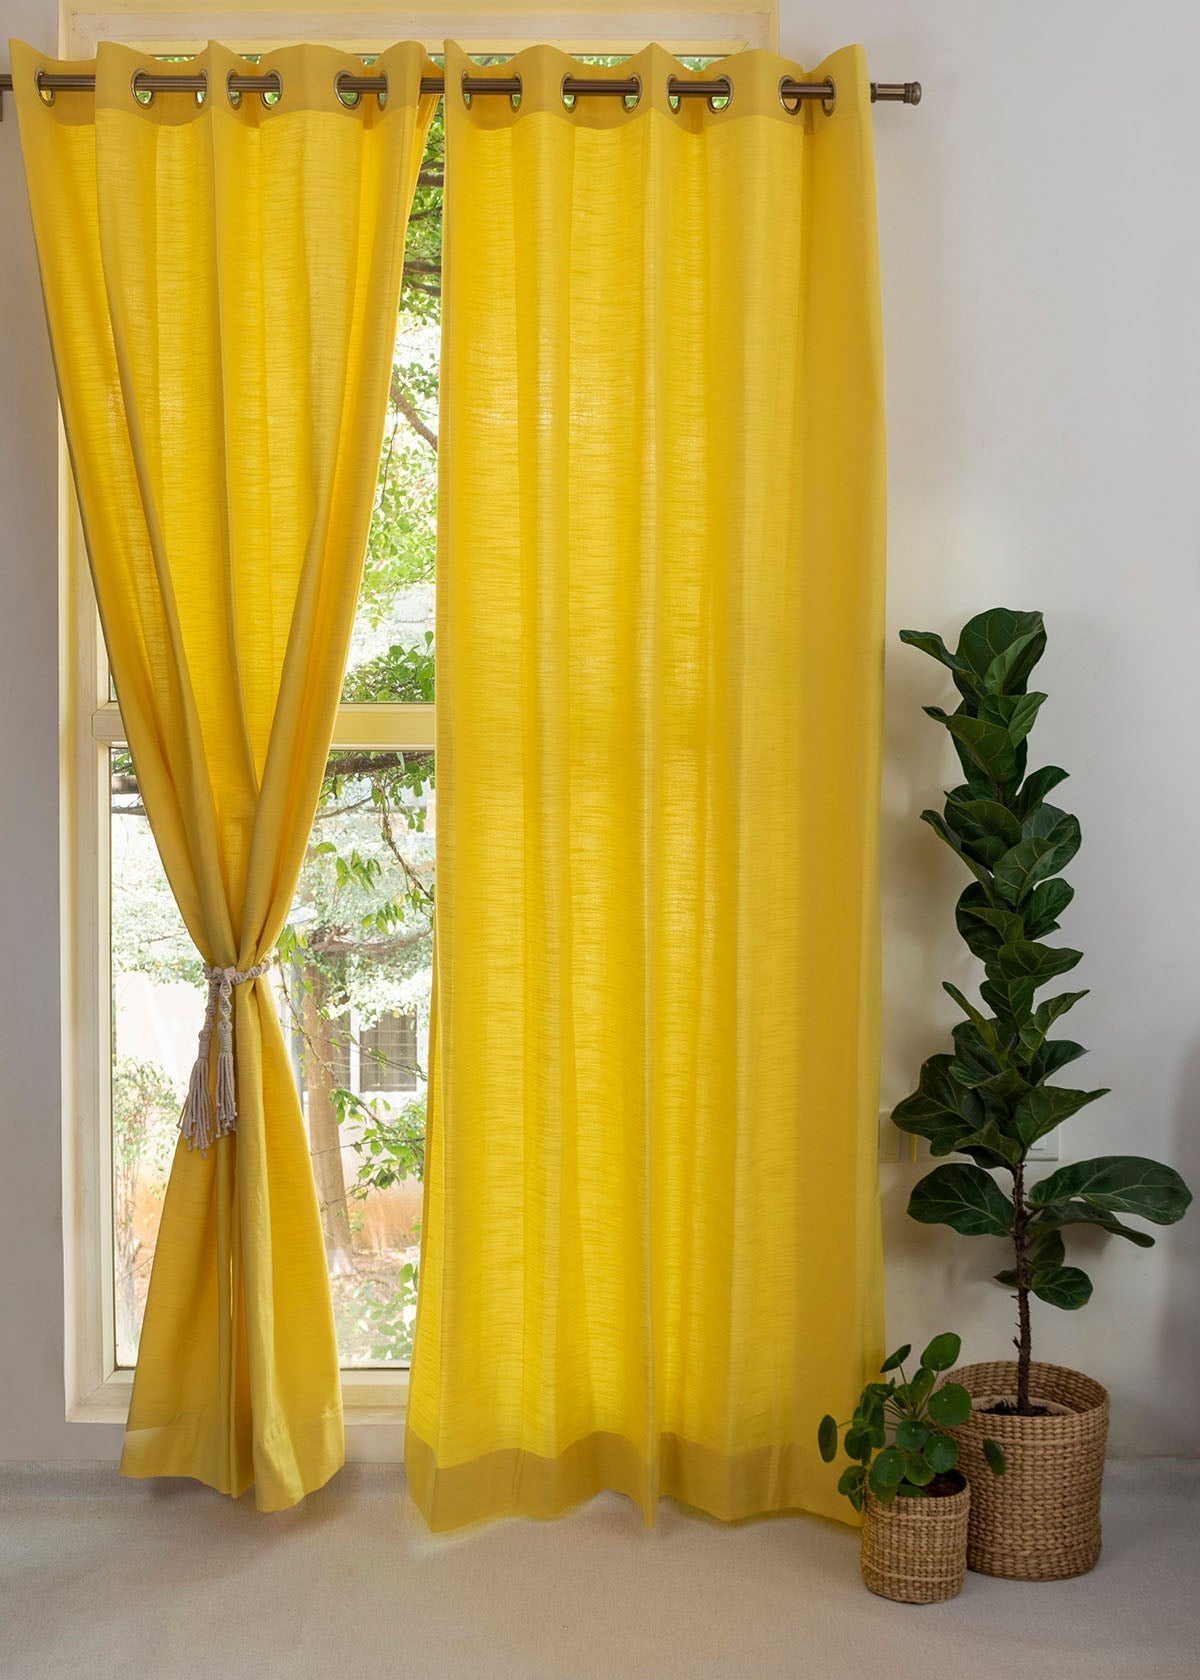 Solid Primrose yellow 100% cotton plain curtain for bedroom - Room darkening - Pack of 1